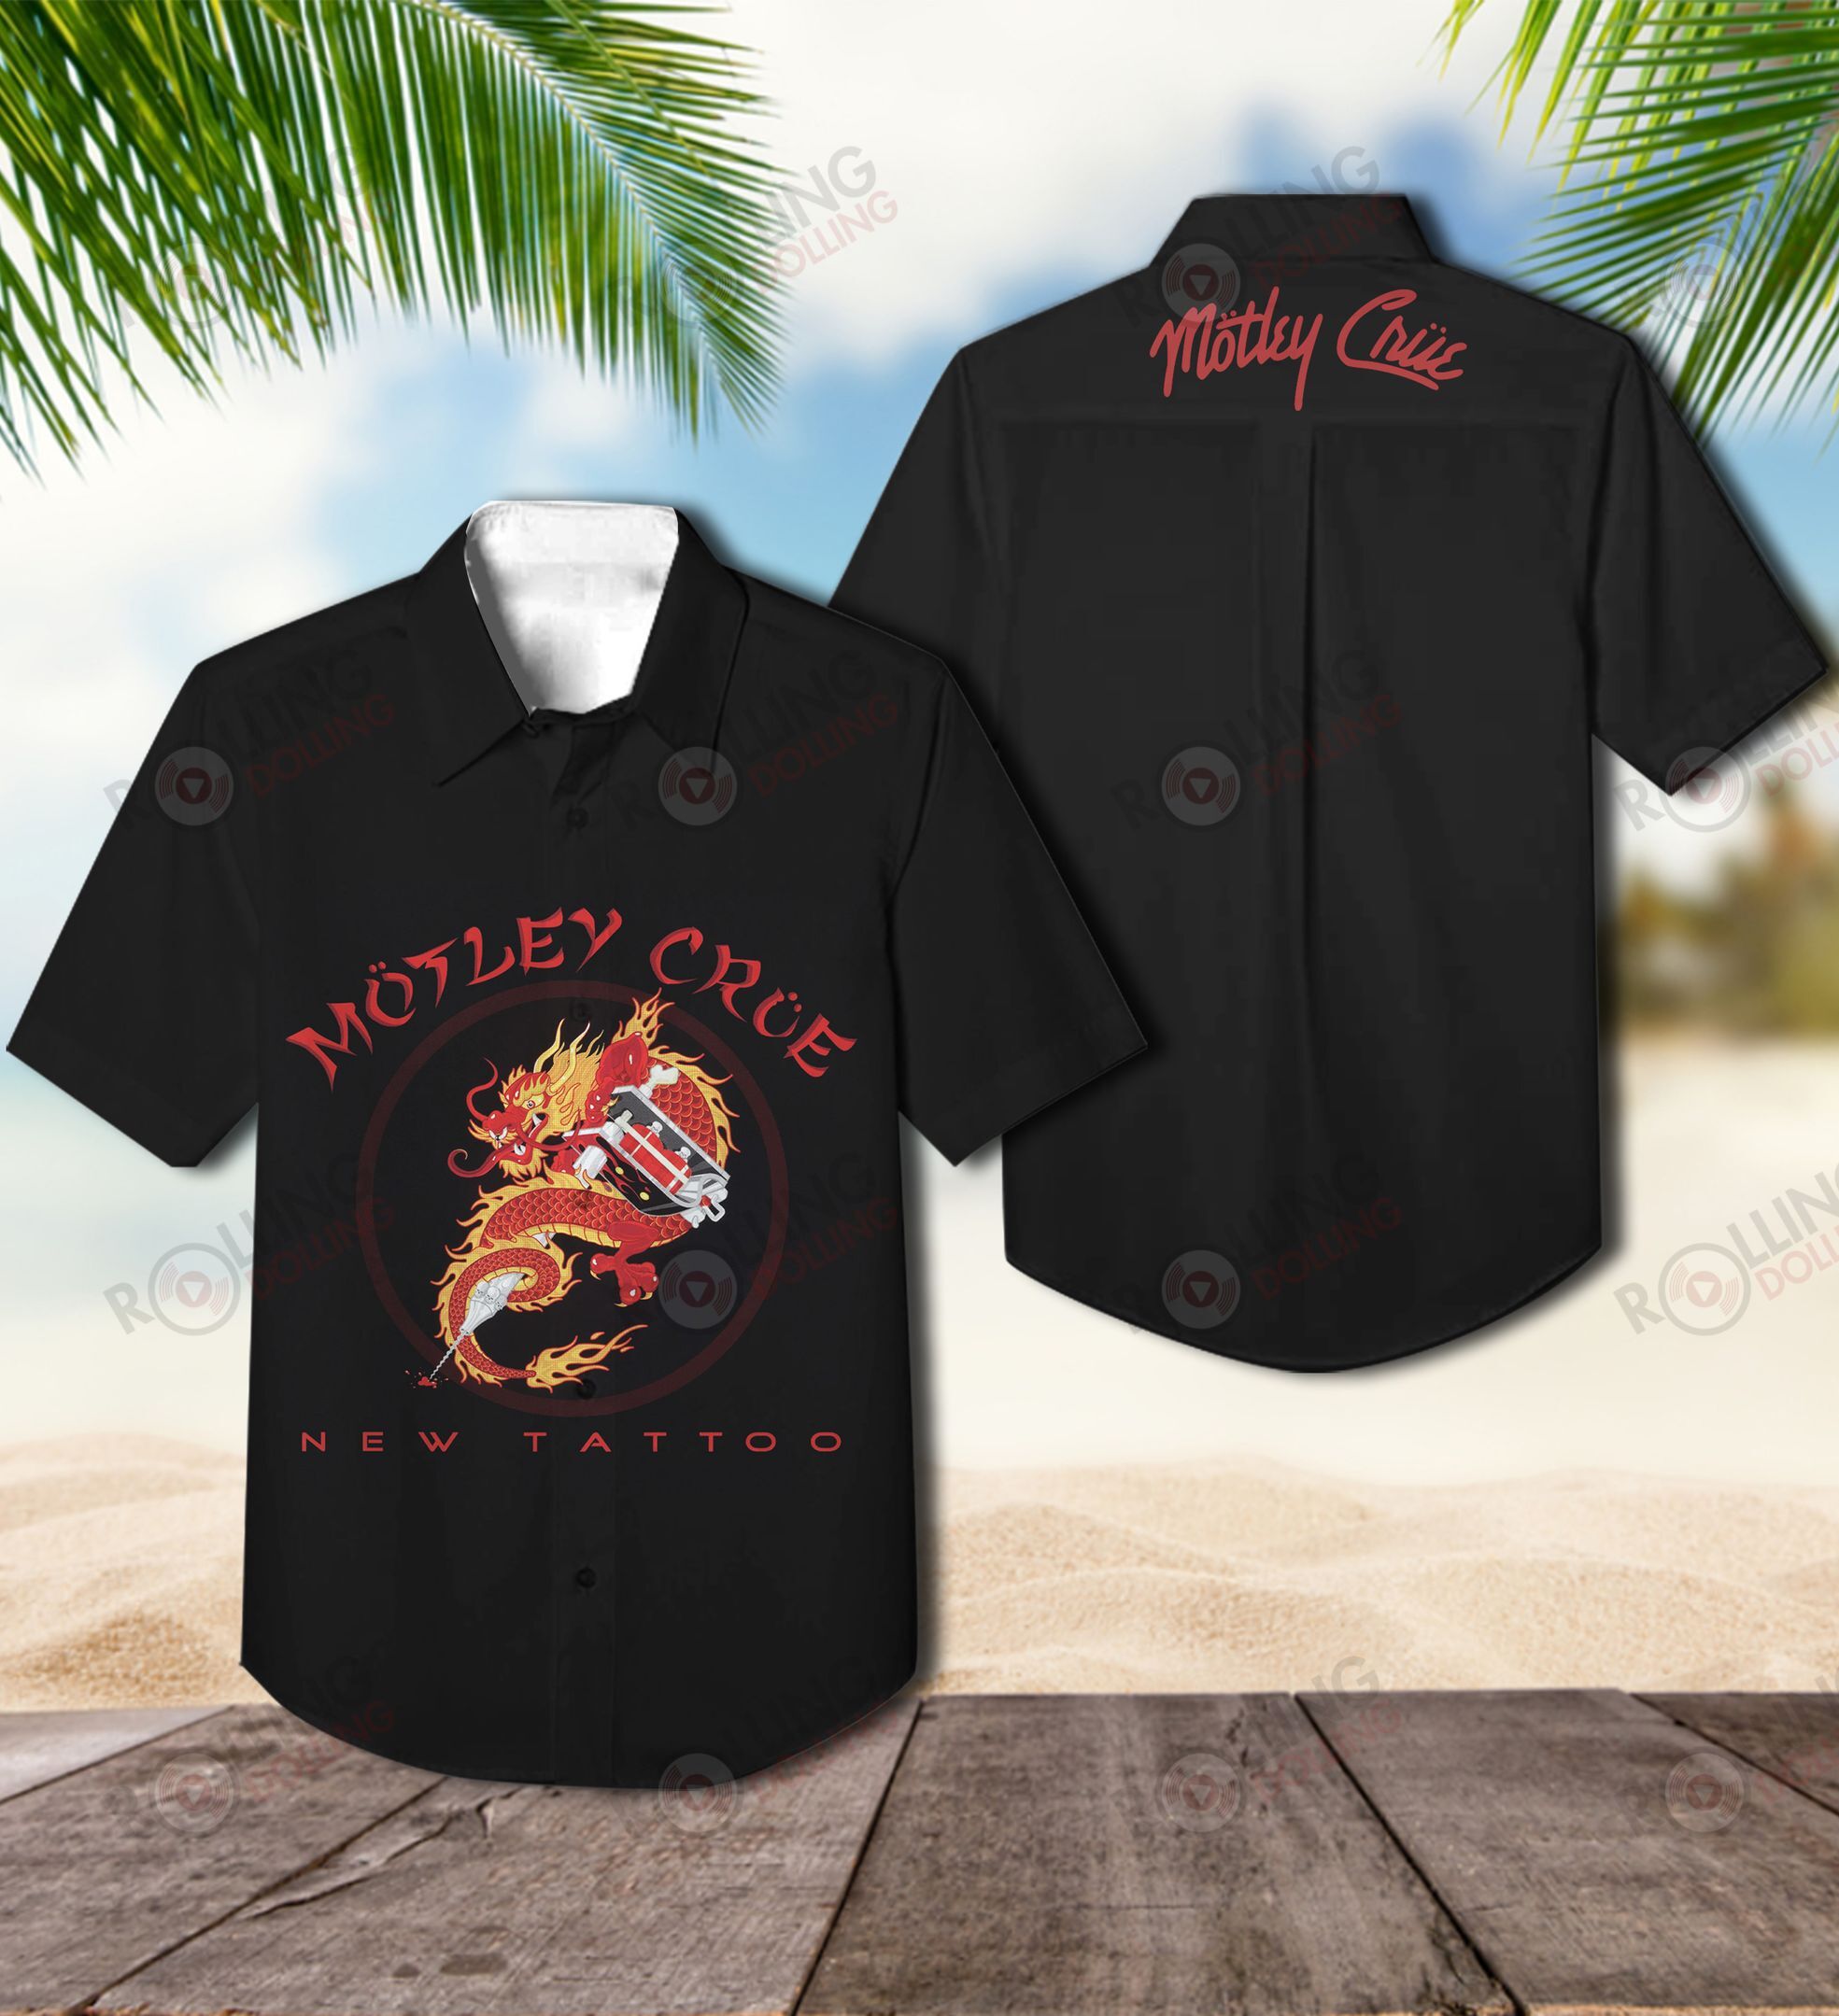 This would make a great gift for any fan who loves Hawaiian Shirt as well as Rock band 90